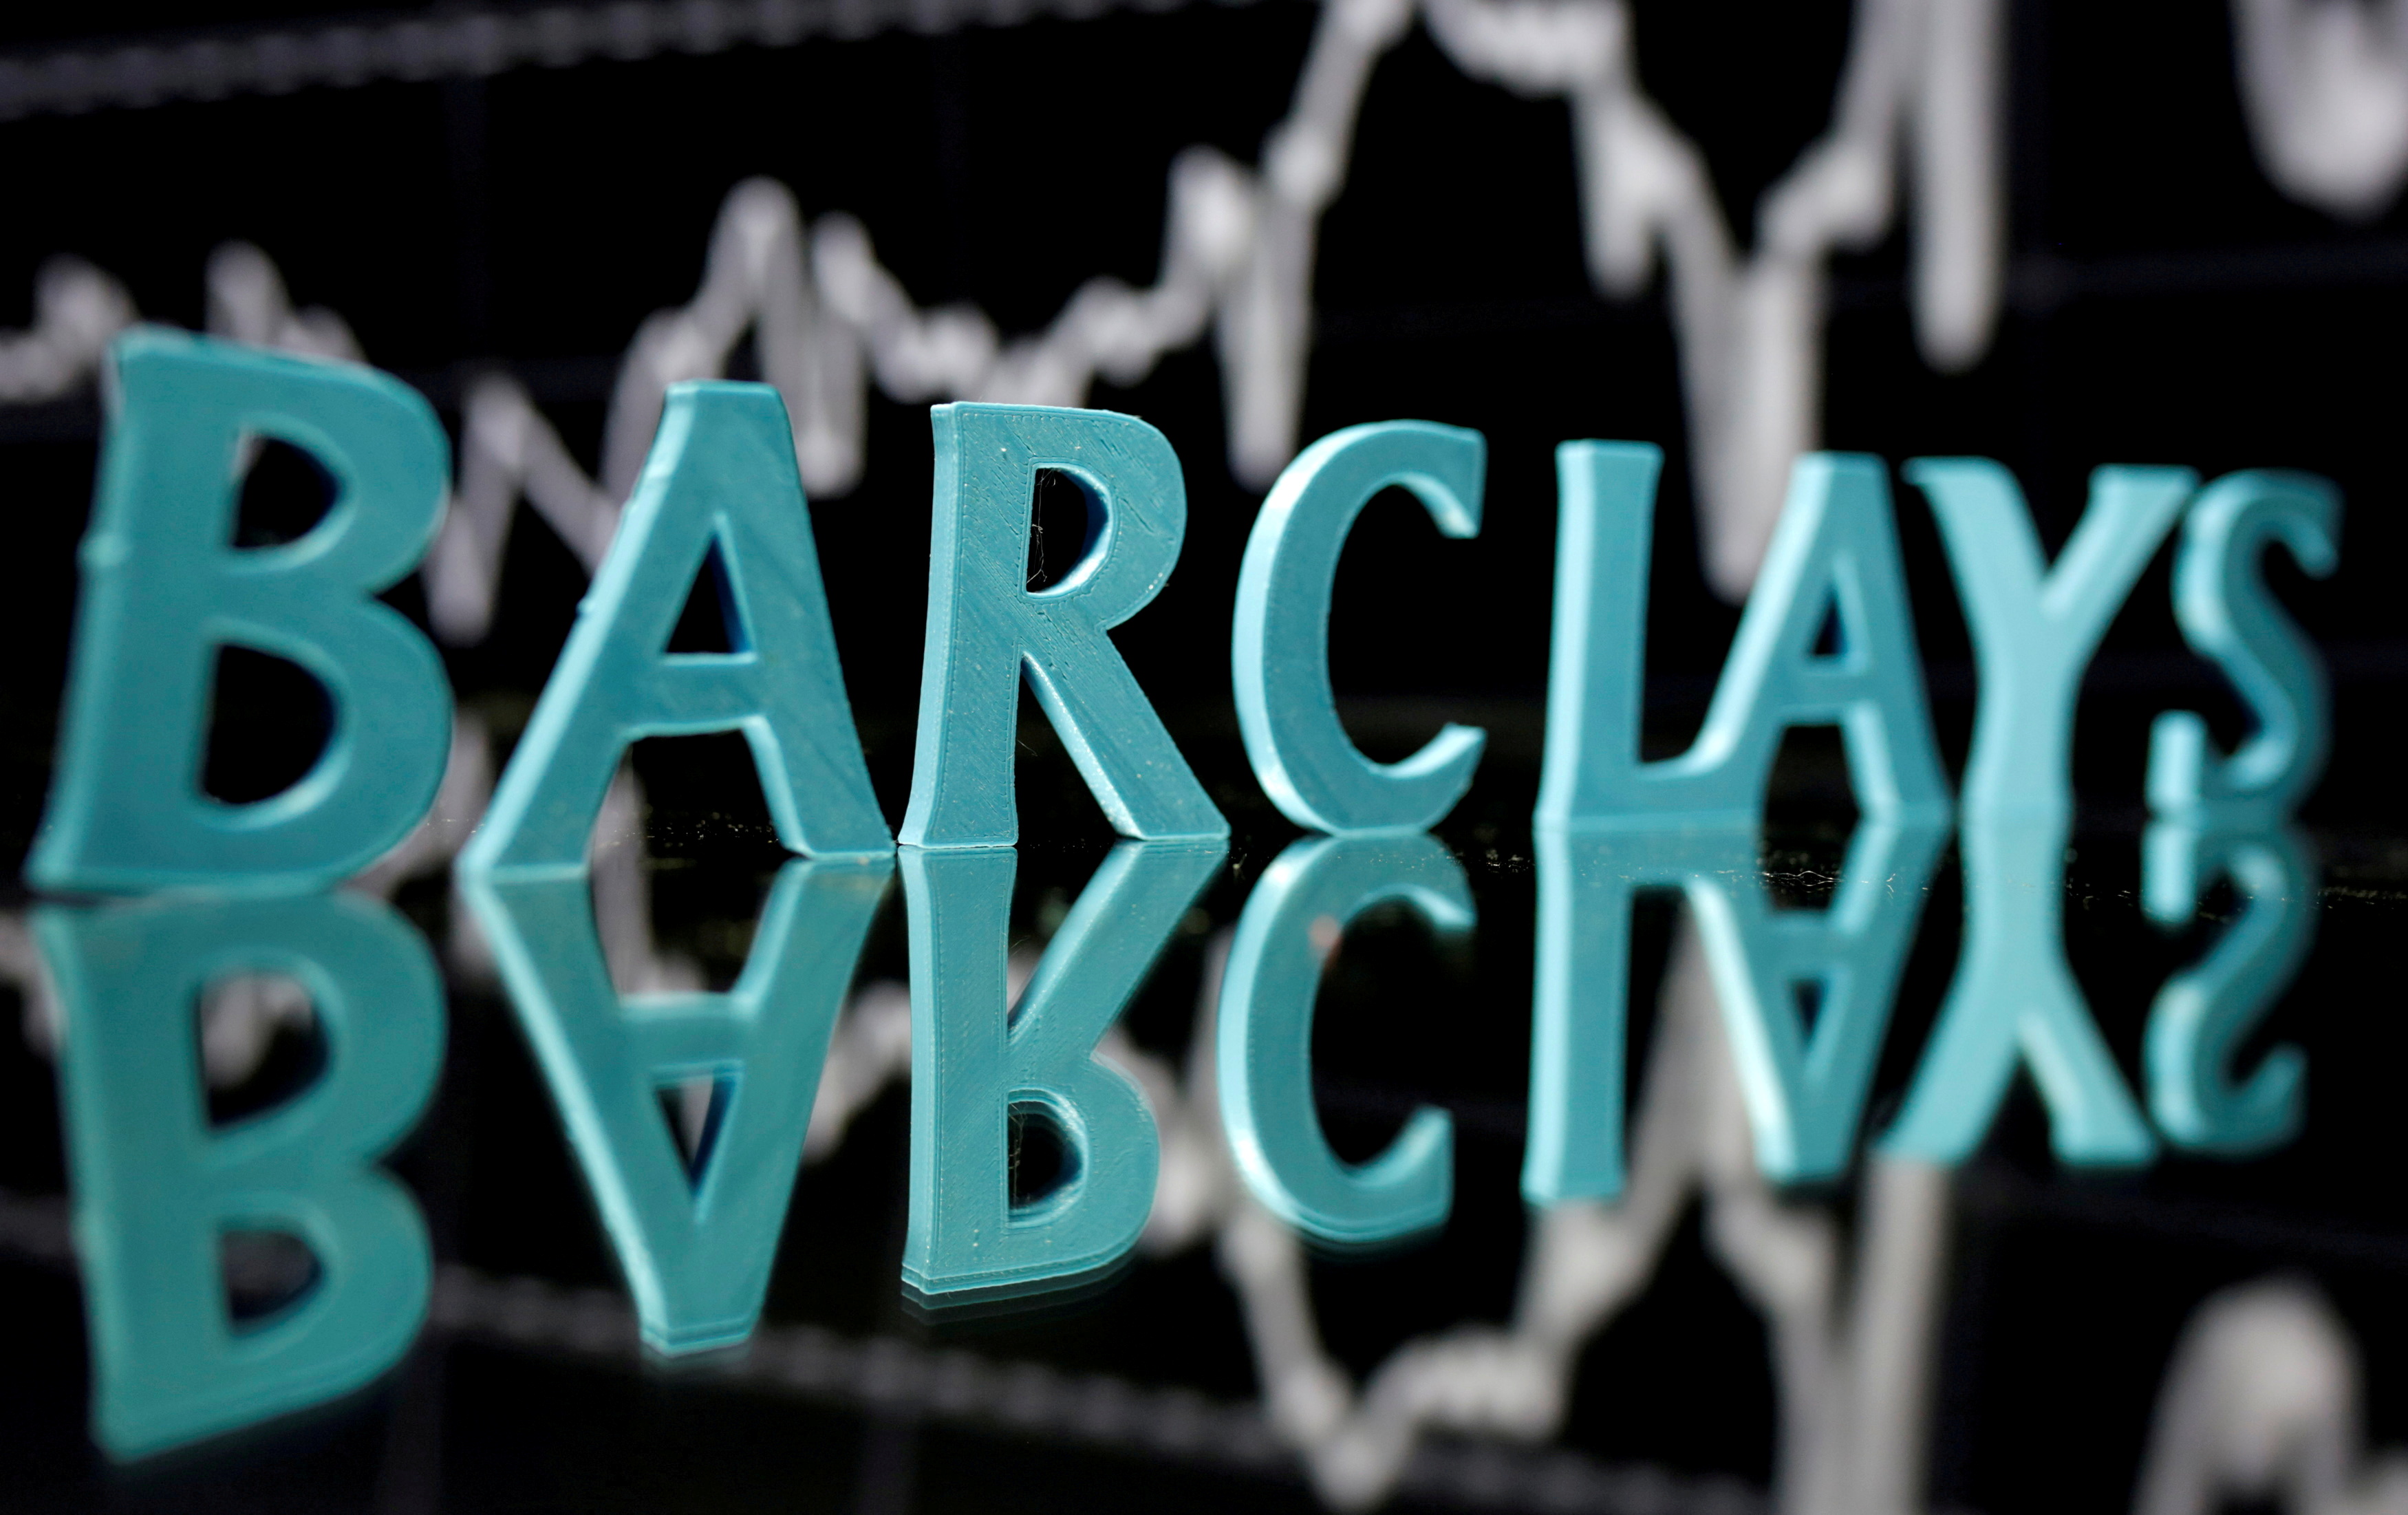 The Barclays logo is seen in front of displayed stock graph in this illustration taken June 21, 2017. REUTERS/Dado Ruvic/Illustration